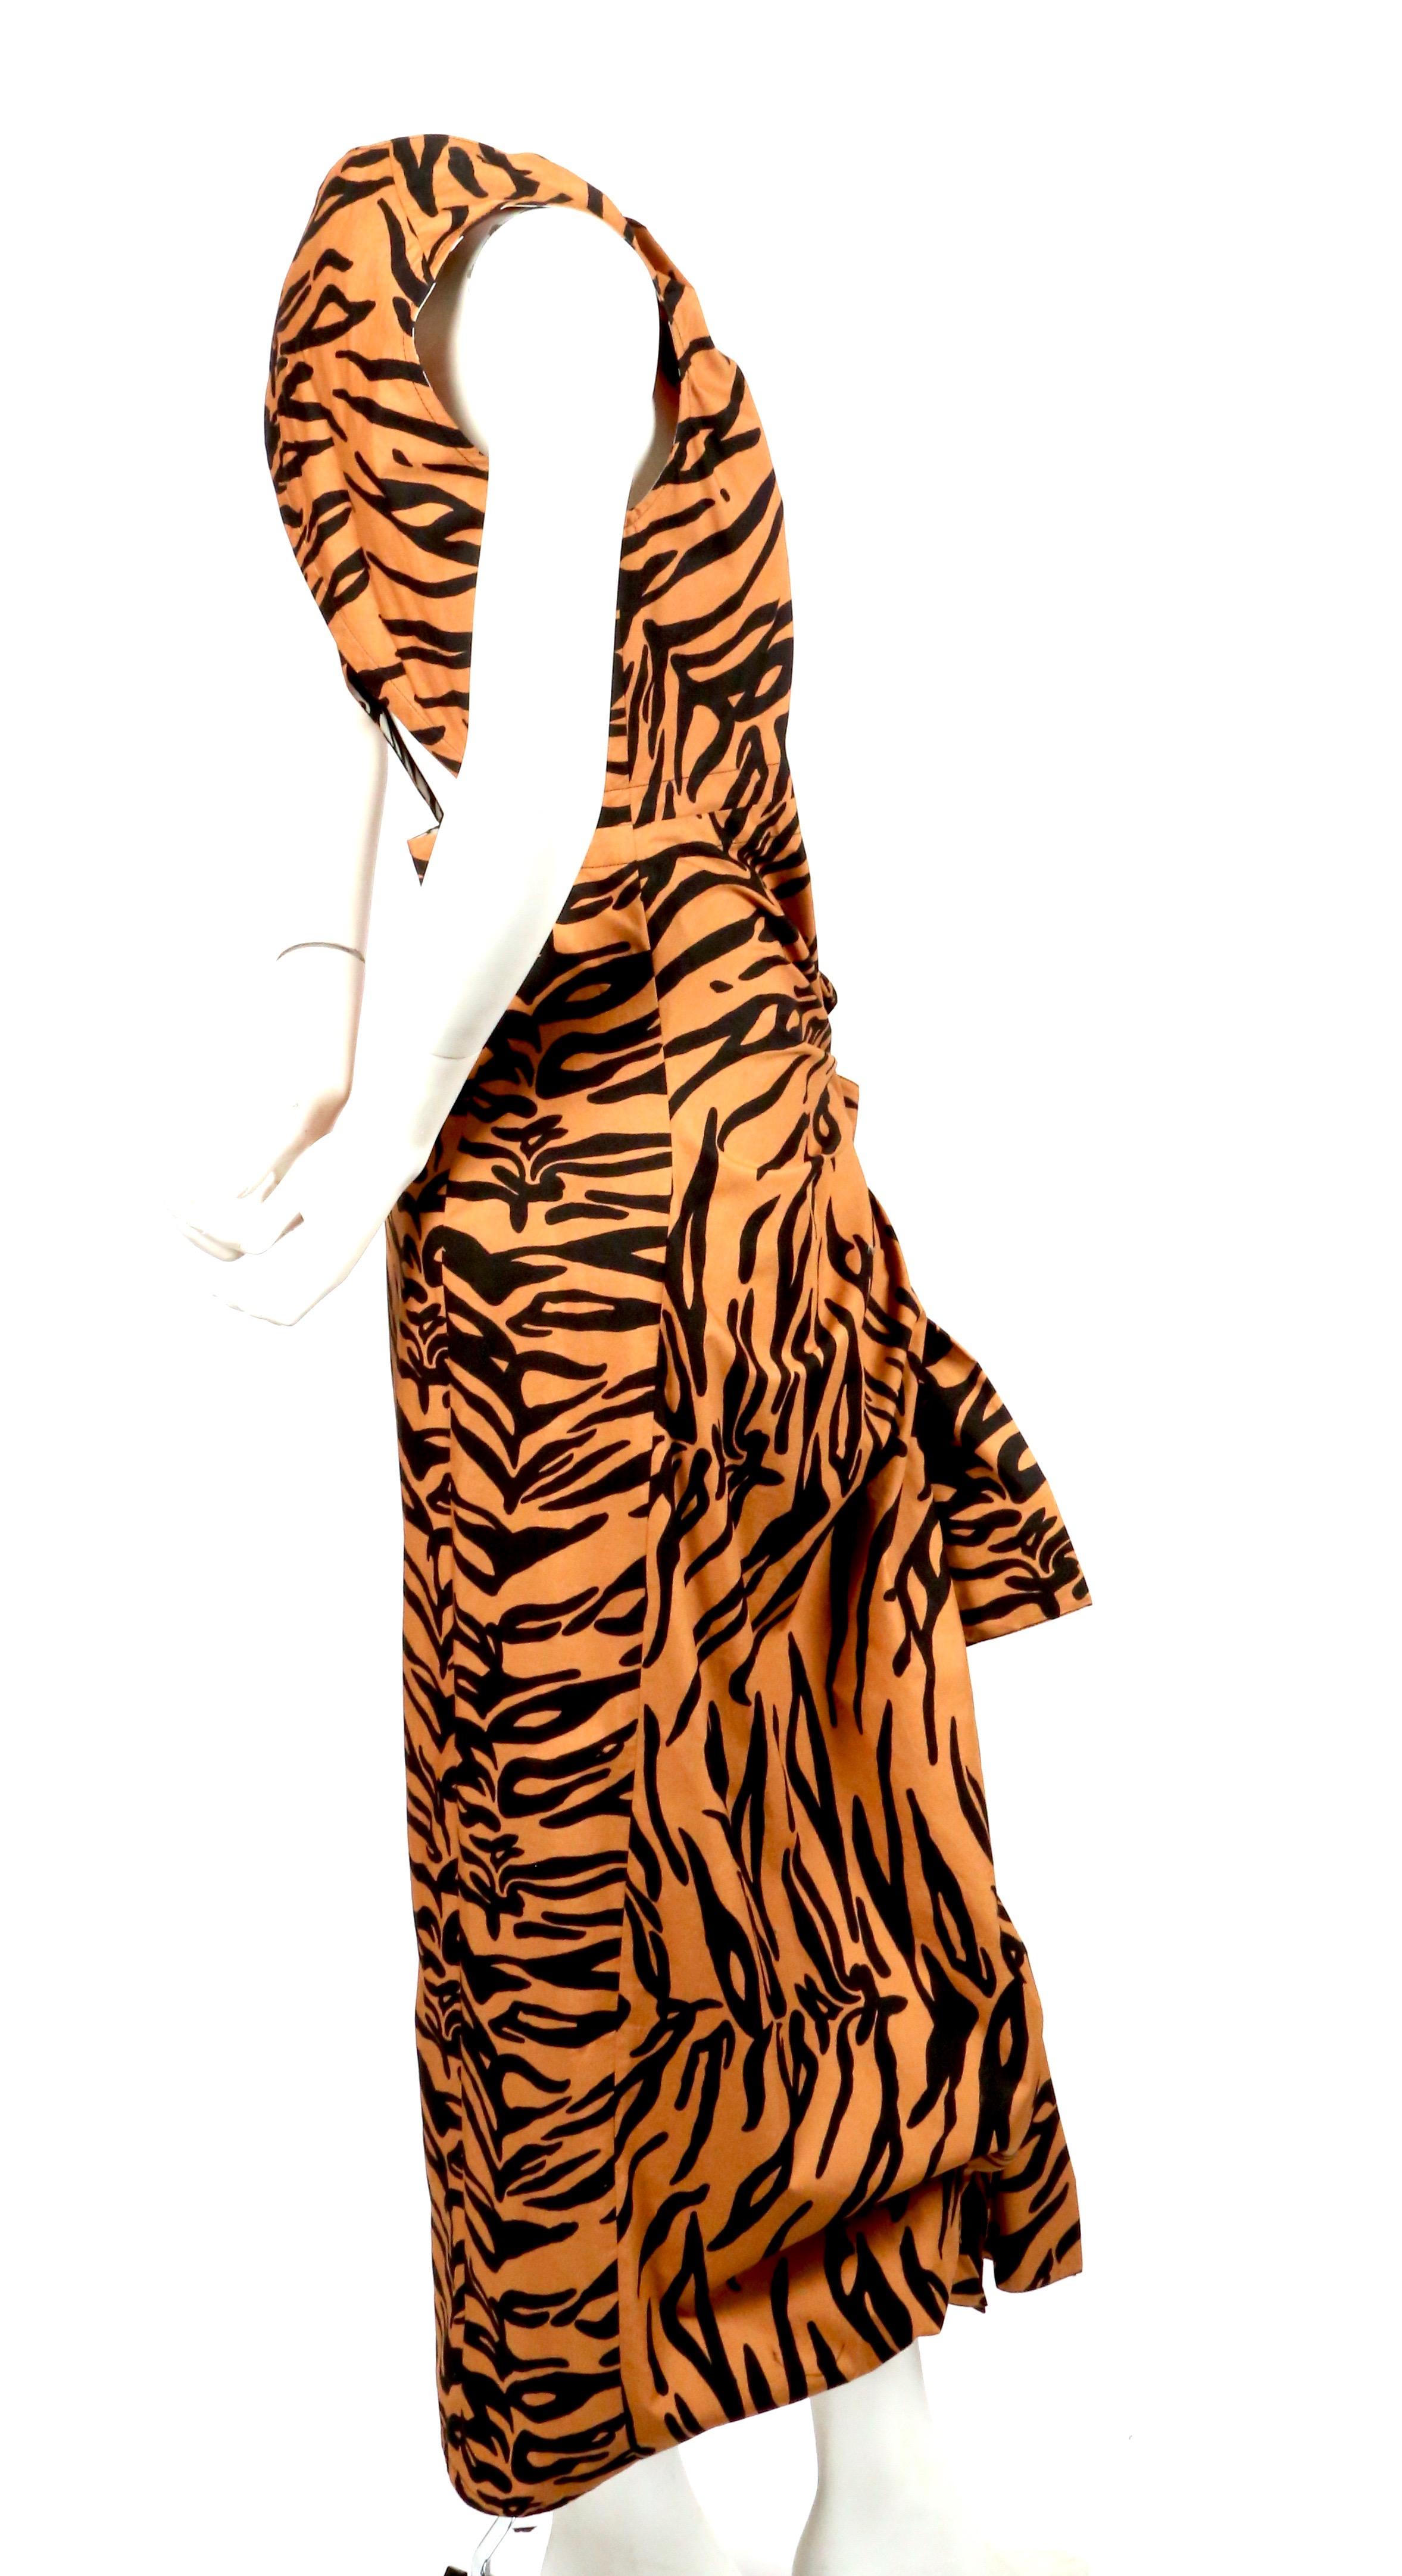 Tiger printed, cotton dress with draped ties and open back designed by Phoebe Philo for Celine. Dress is labeled a French size 38. Measurements are very difficult to take for this piece however it was not clipped on the size 2 mannequin. Approximate